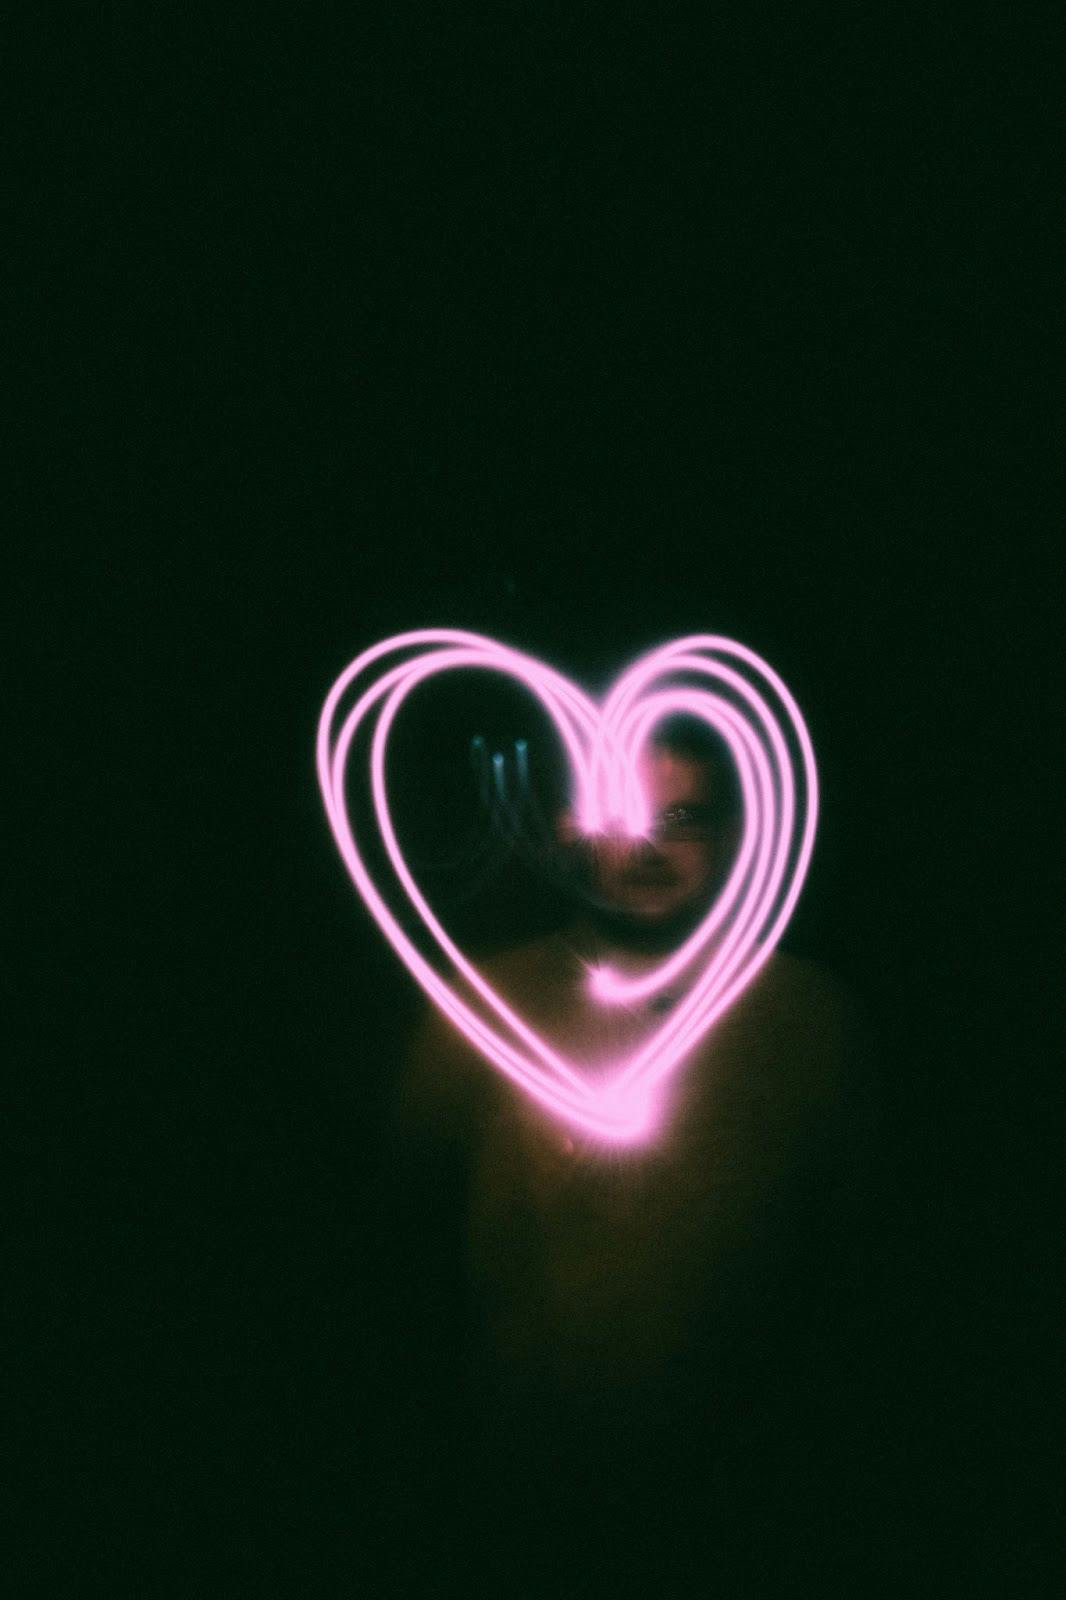 A neon heart with black background for Valentine's Day.